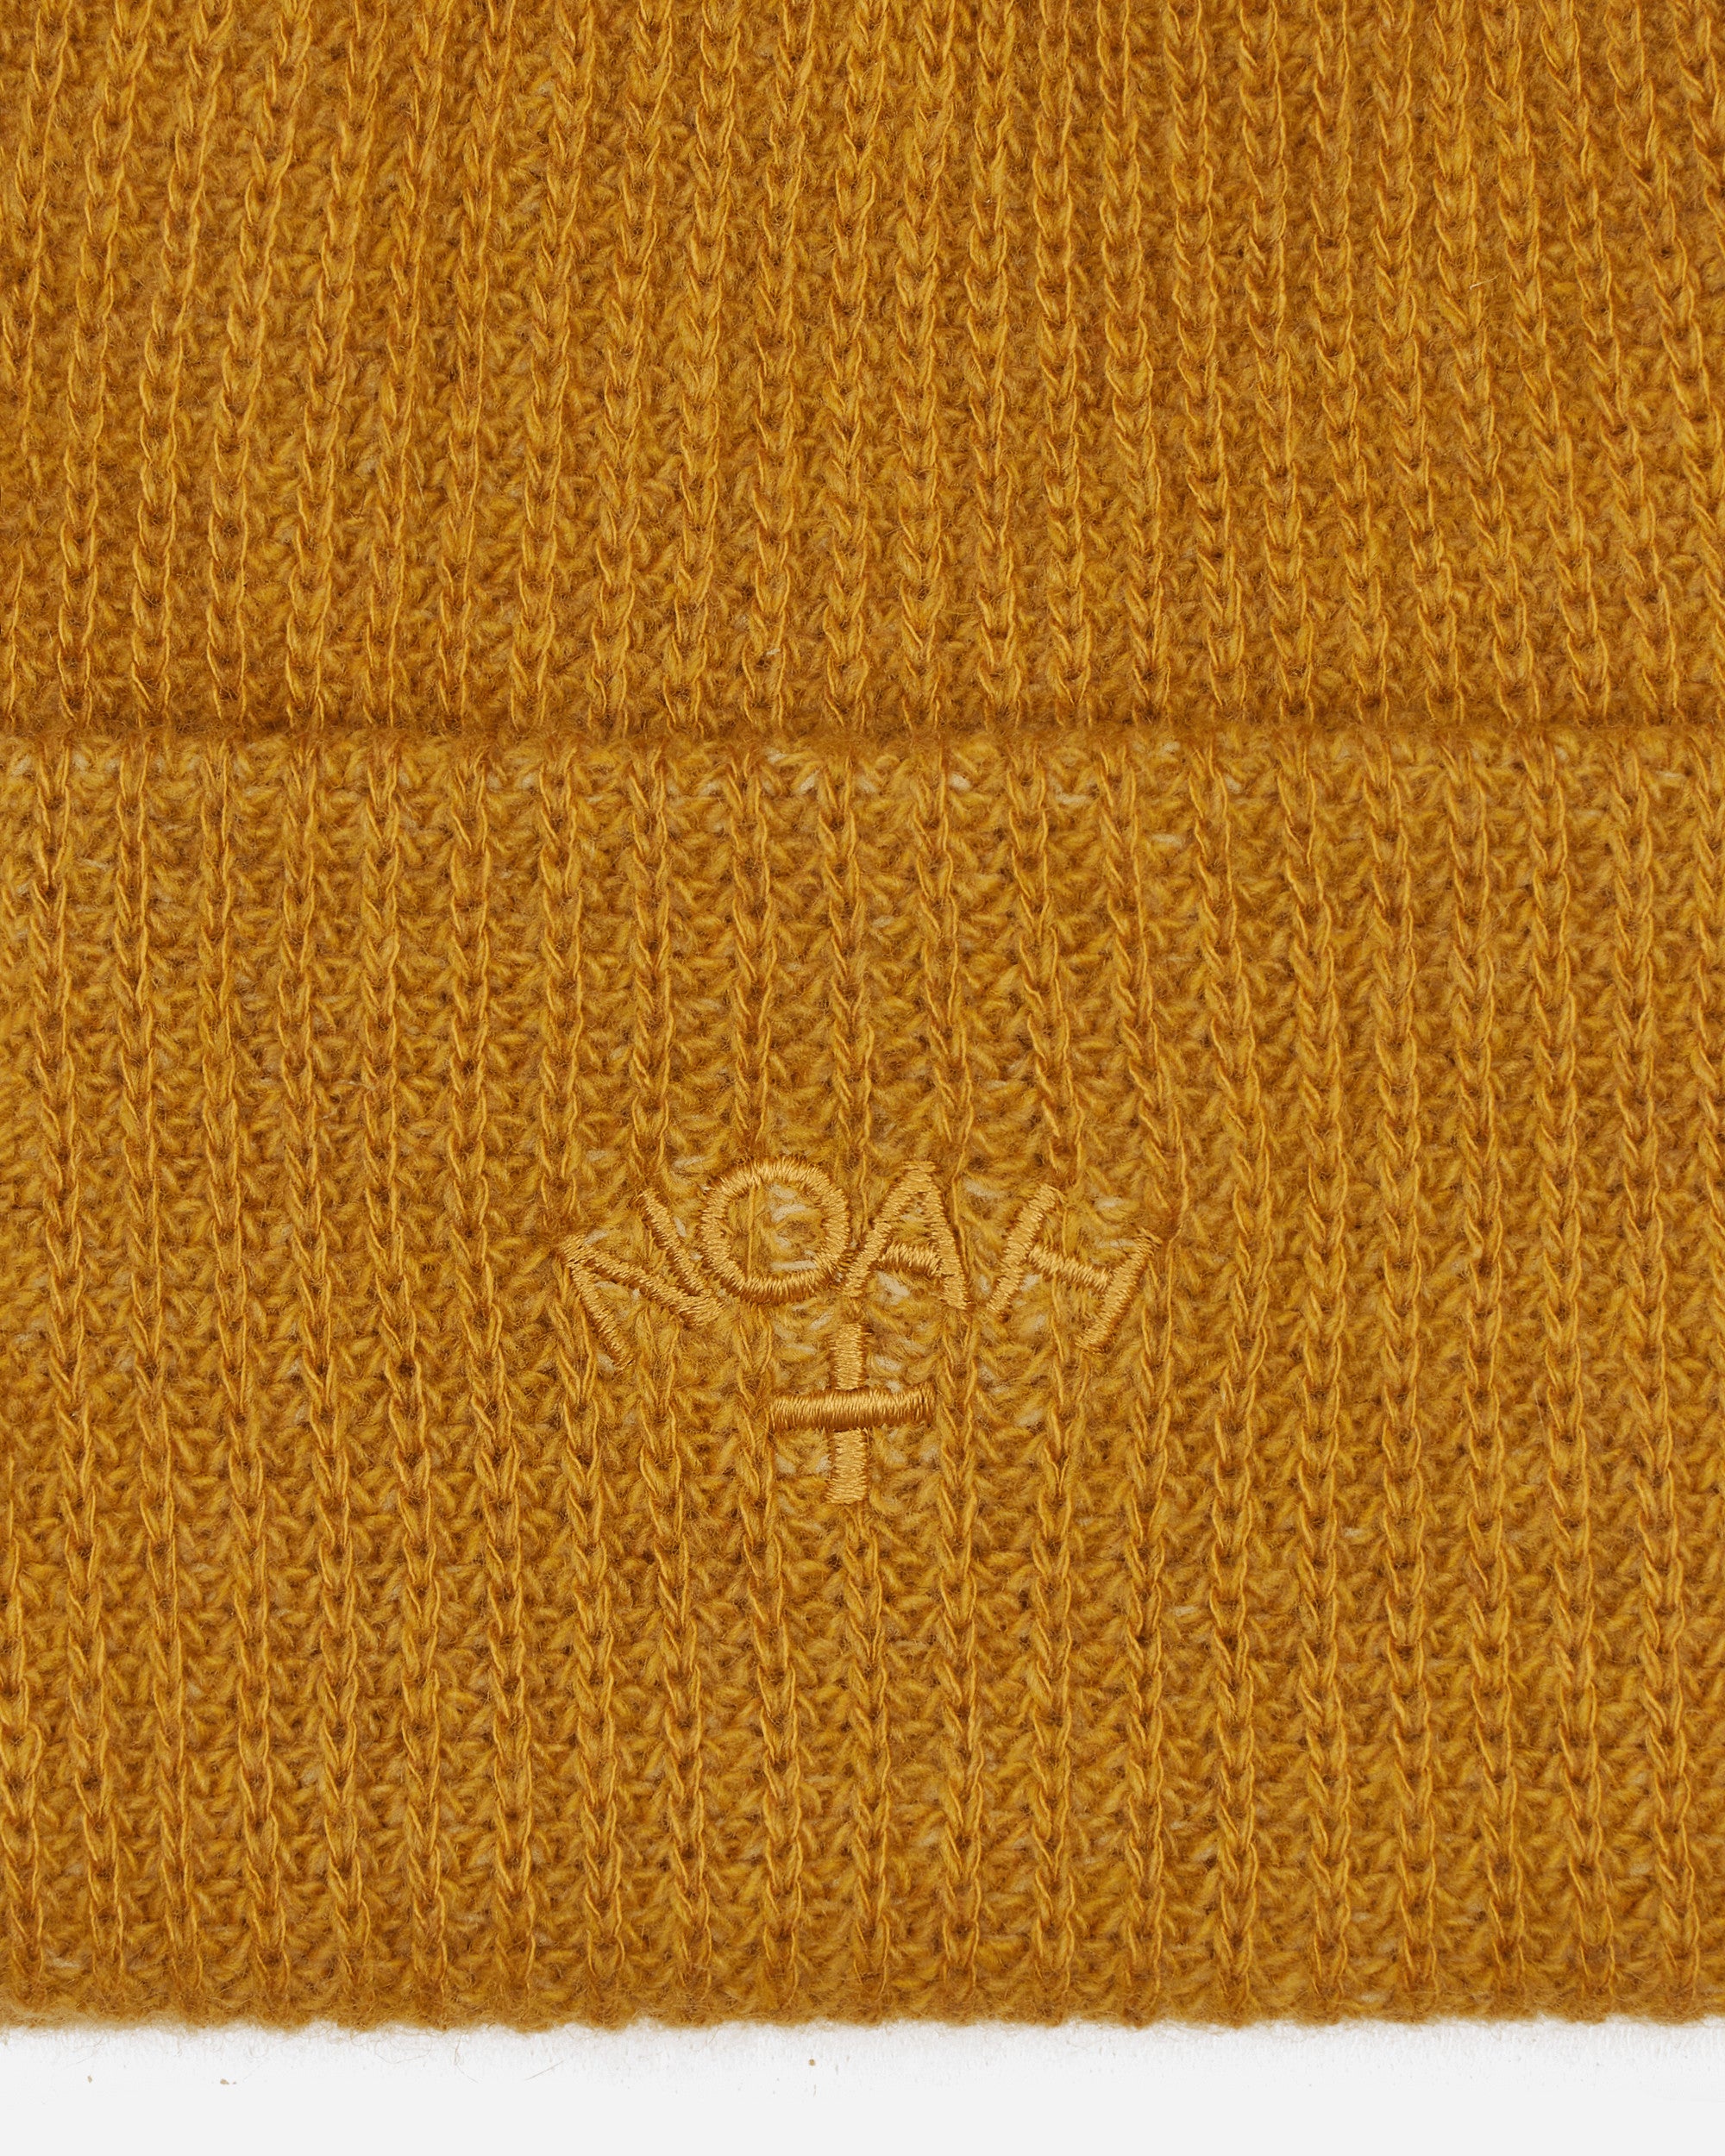 Noah Recycled Cashmere Beanie Camel Hats Beanies BN029FW22 CML